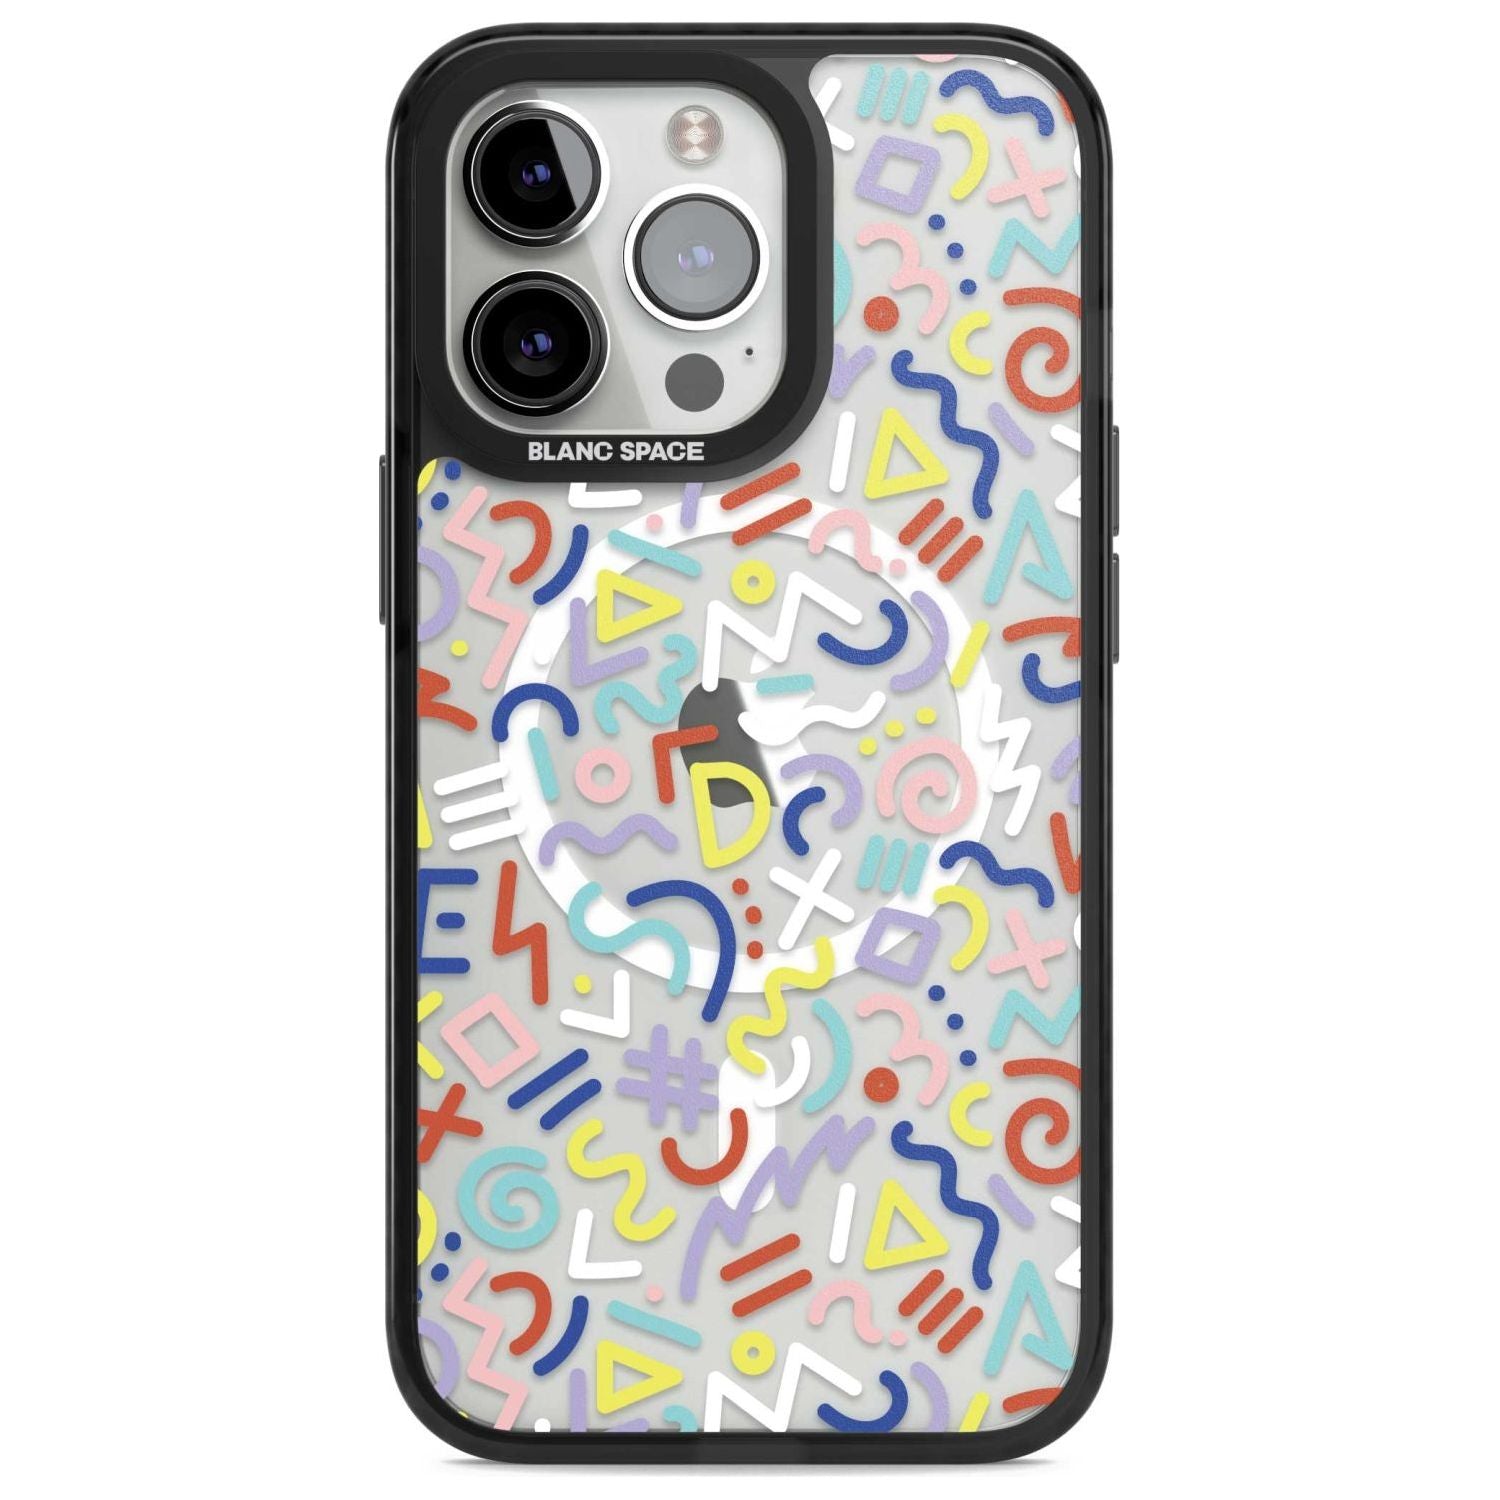 Colourful Mixed Shapes Retro Pattern Design Phone Case iPhone 15 Pro Max / Magsafe Black Impact Case,iPhone 15 Pro / Magsafe Black Impact Case,iPhone 14 Pro Max / Magsafe Black Impact Case,iPhone 14 Pro / Magsafe Black Impact Case,iPhone 13 Pro / Magsafe Black Impact Case Blanc Space